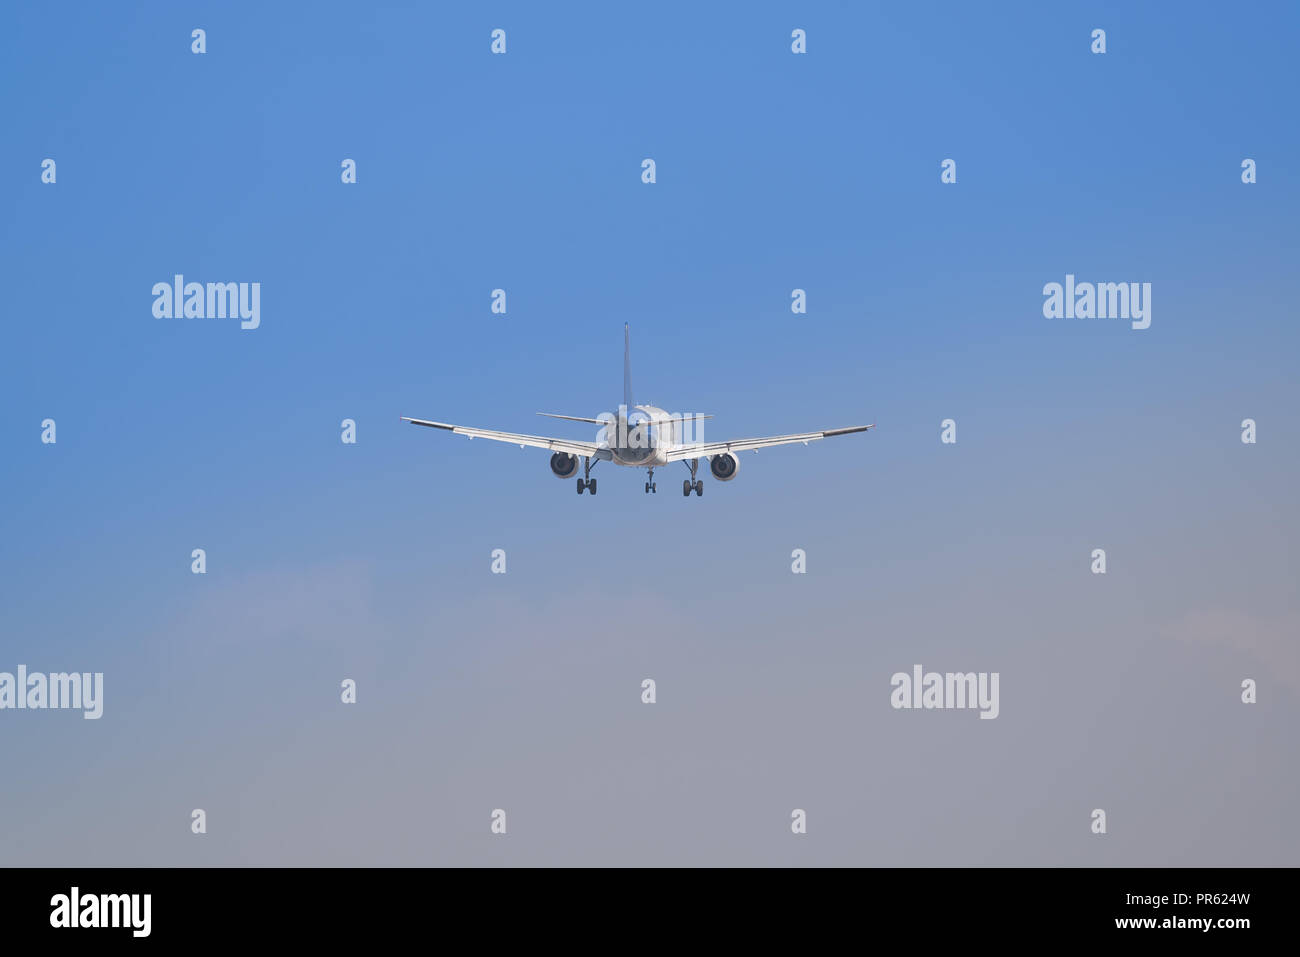 Big airplane flying high with detail of the land gear down Stock Photo